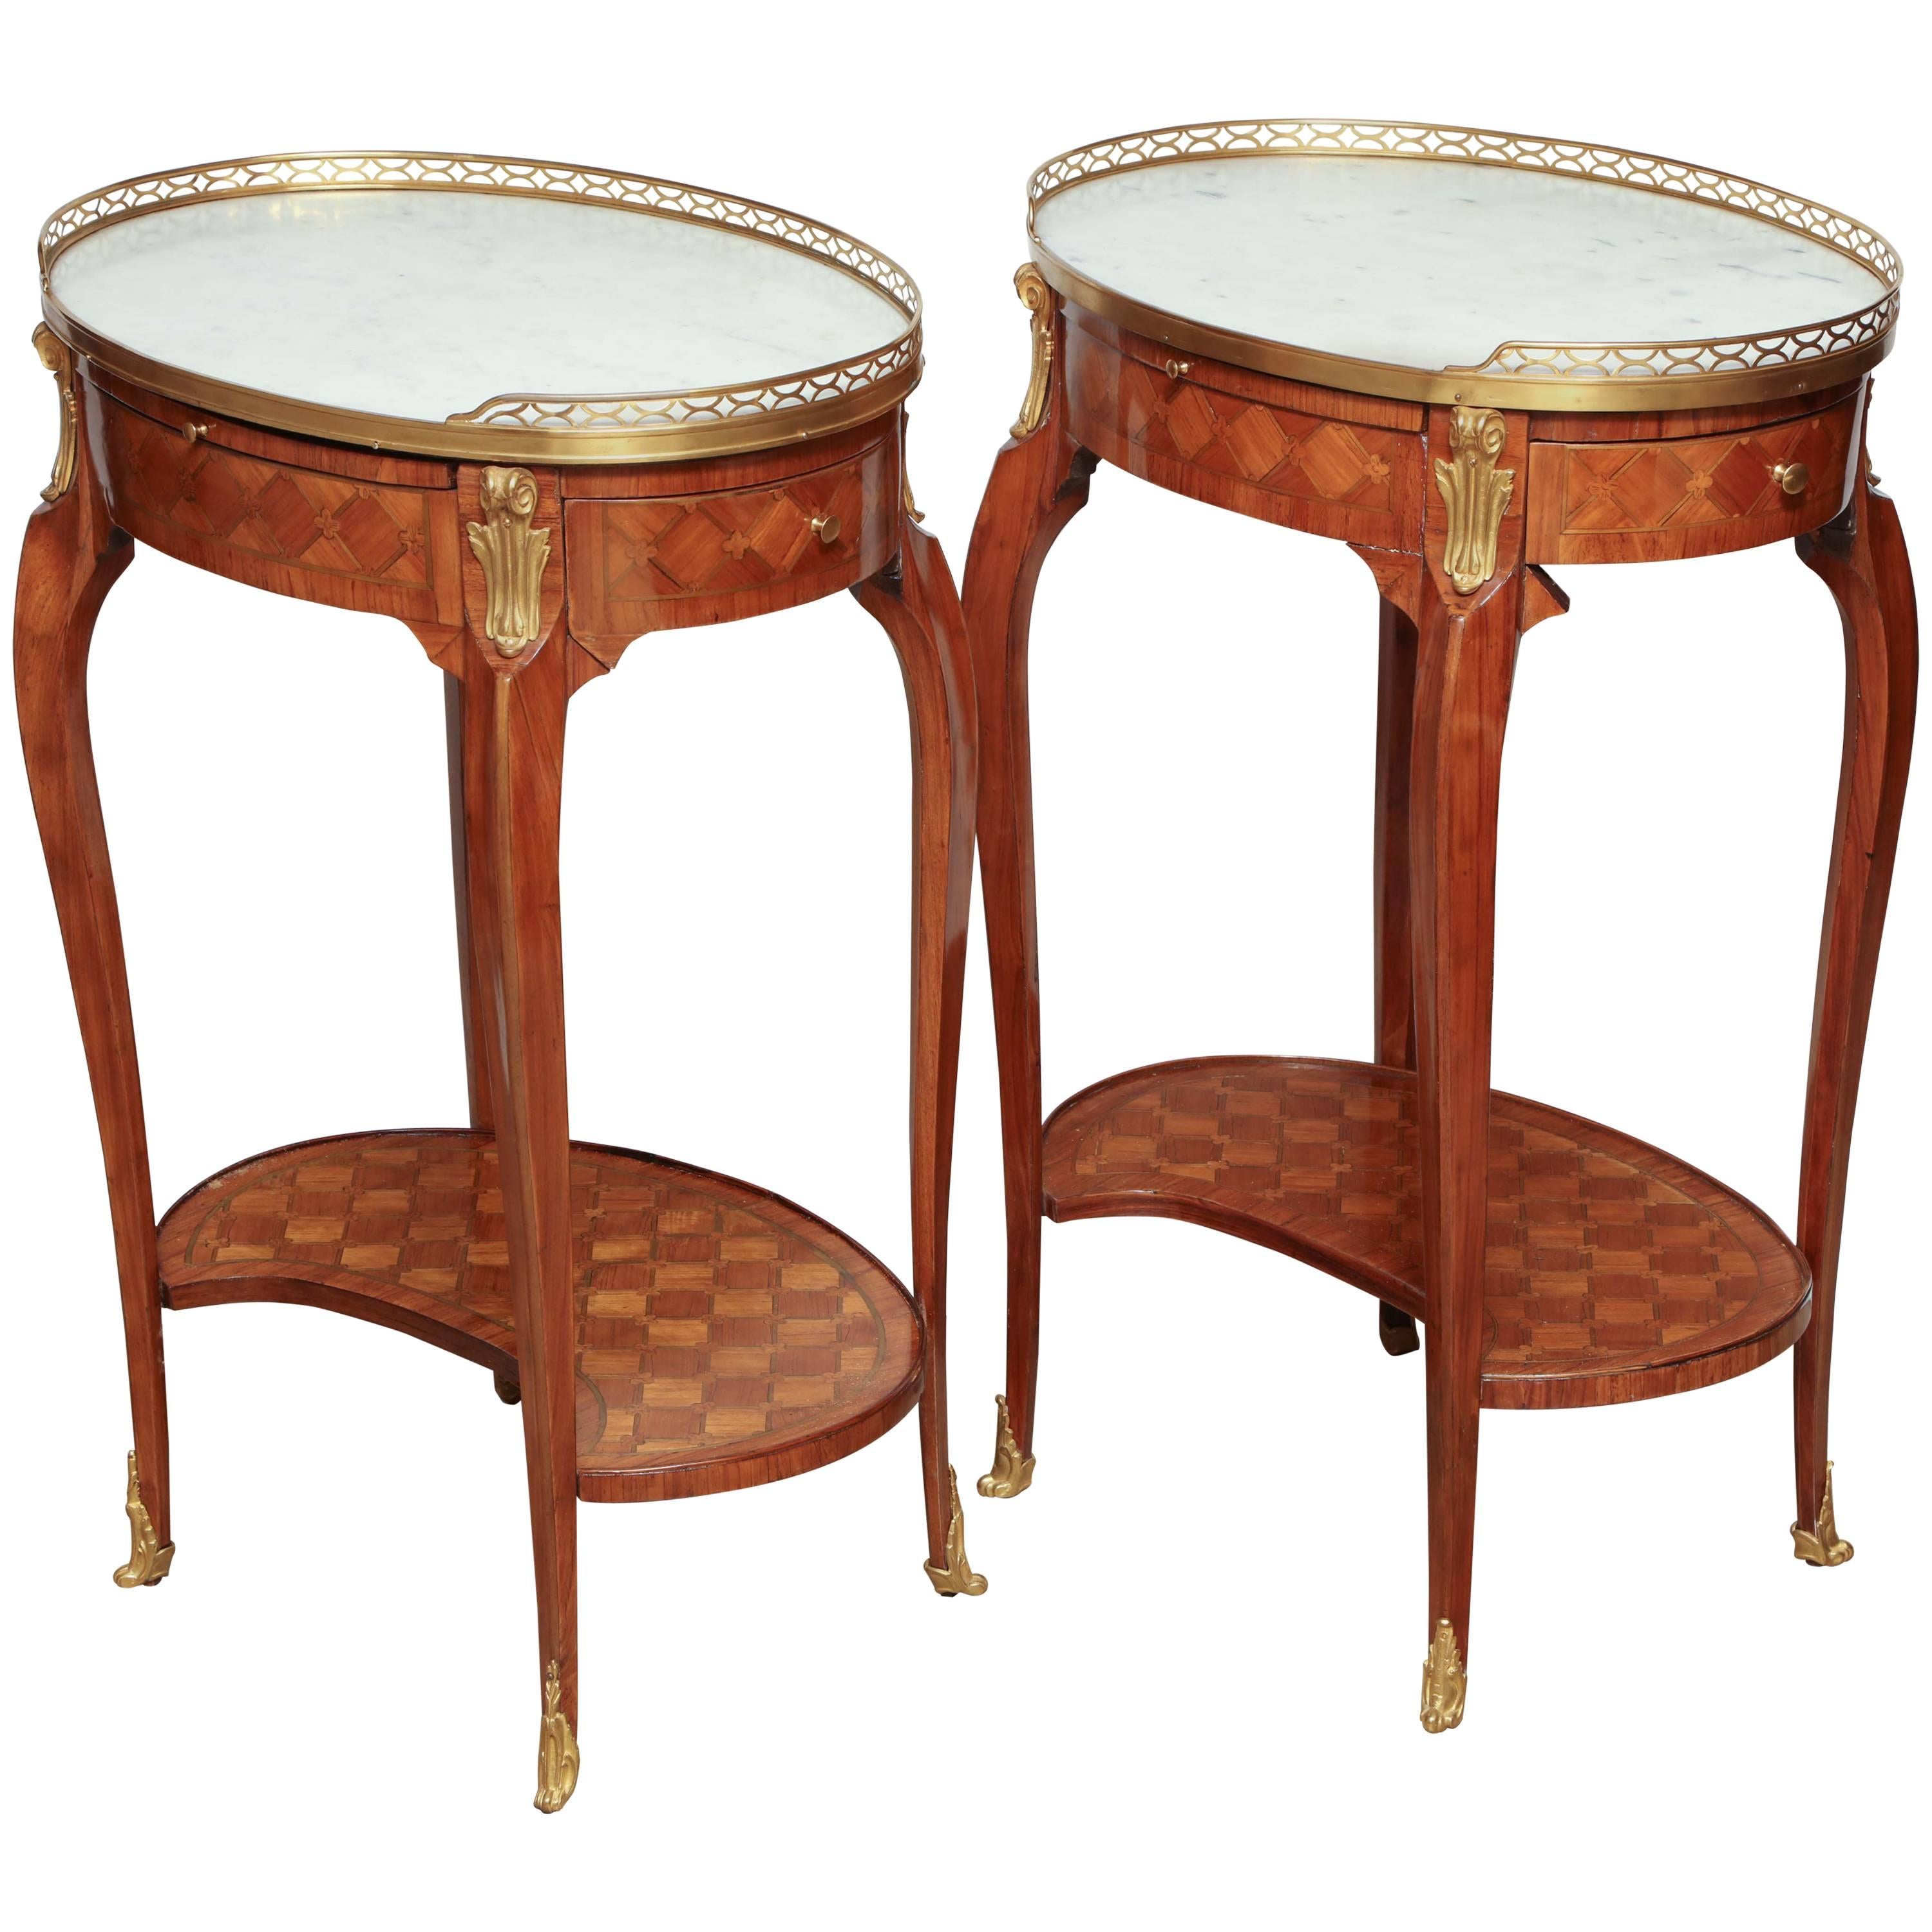 Pair of French Marble-Top Side Tables